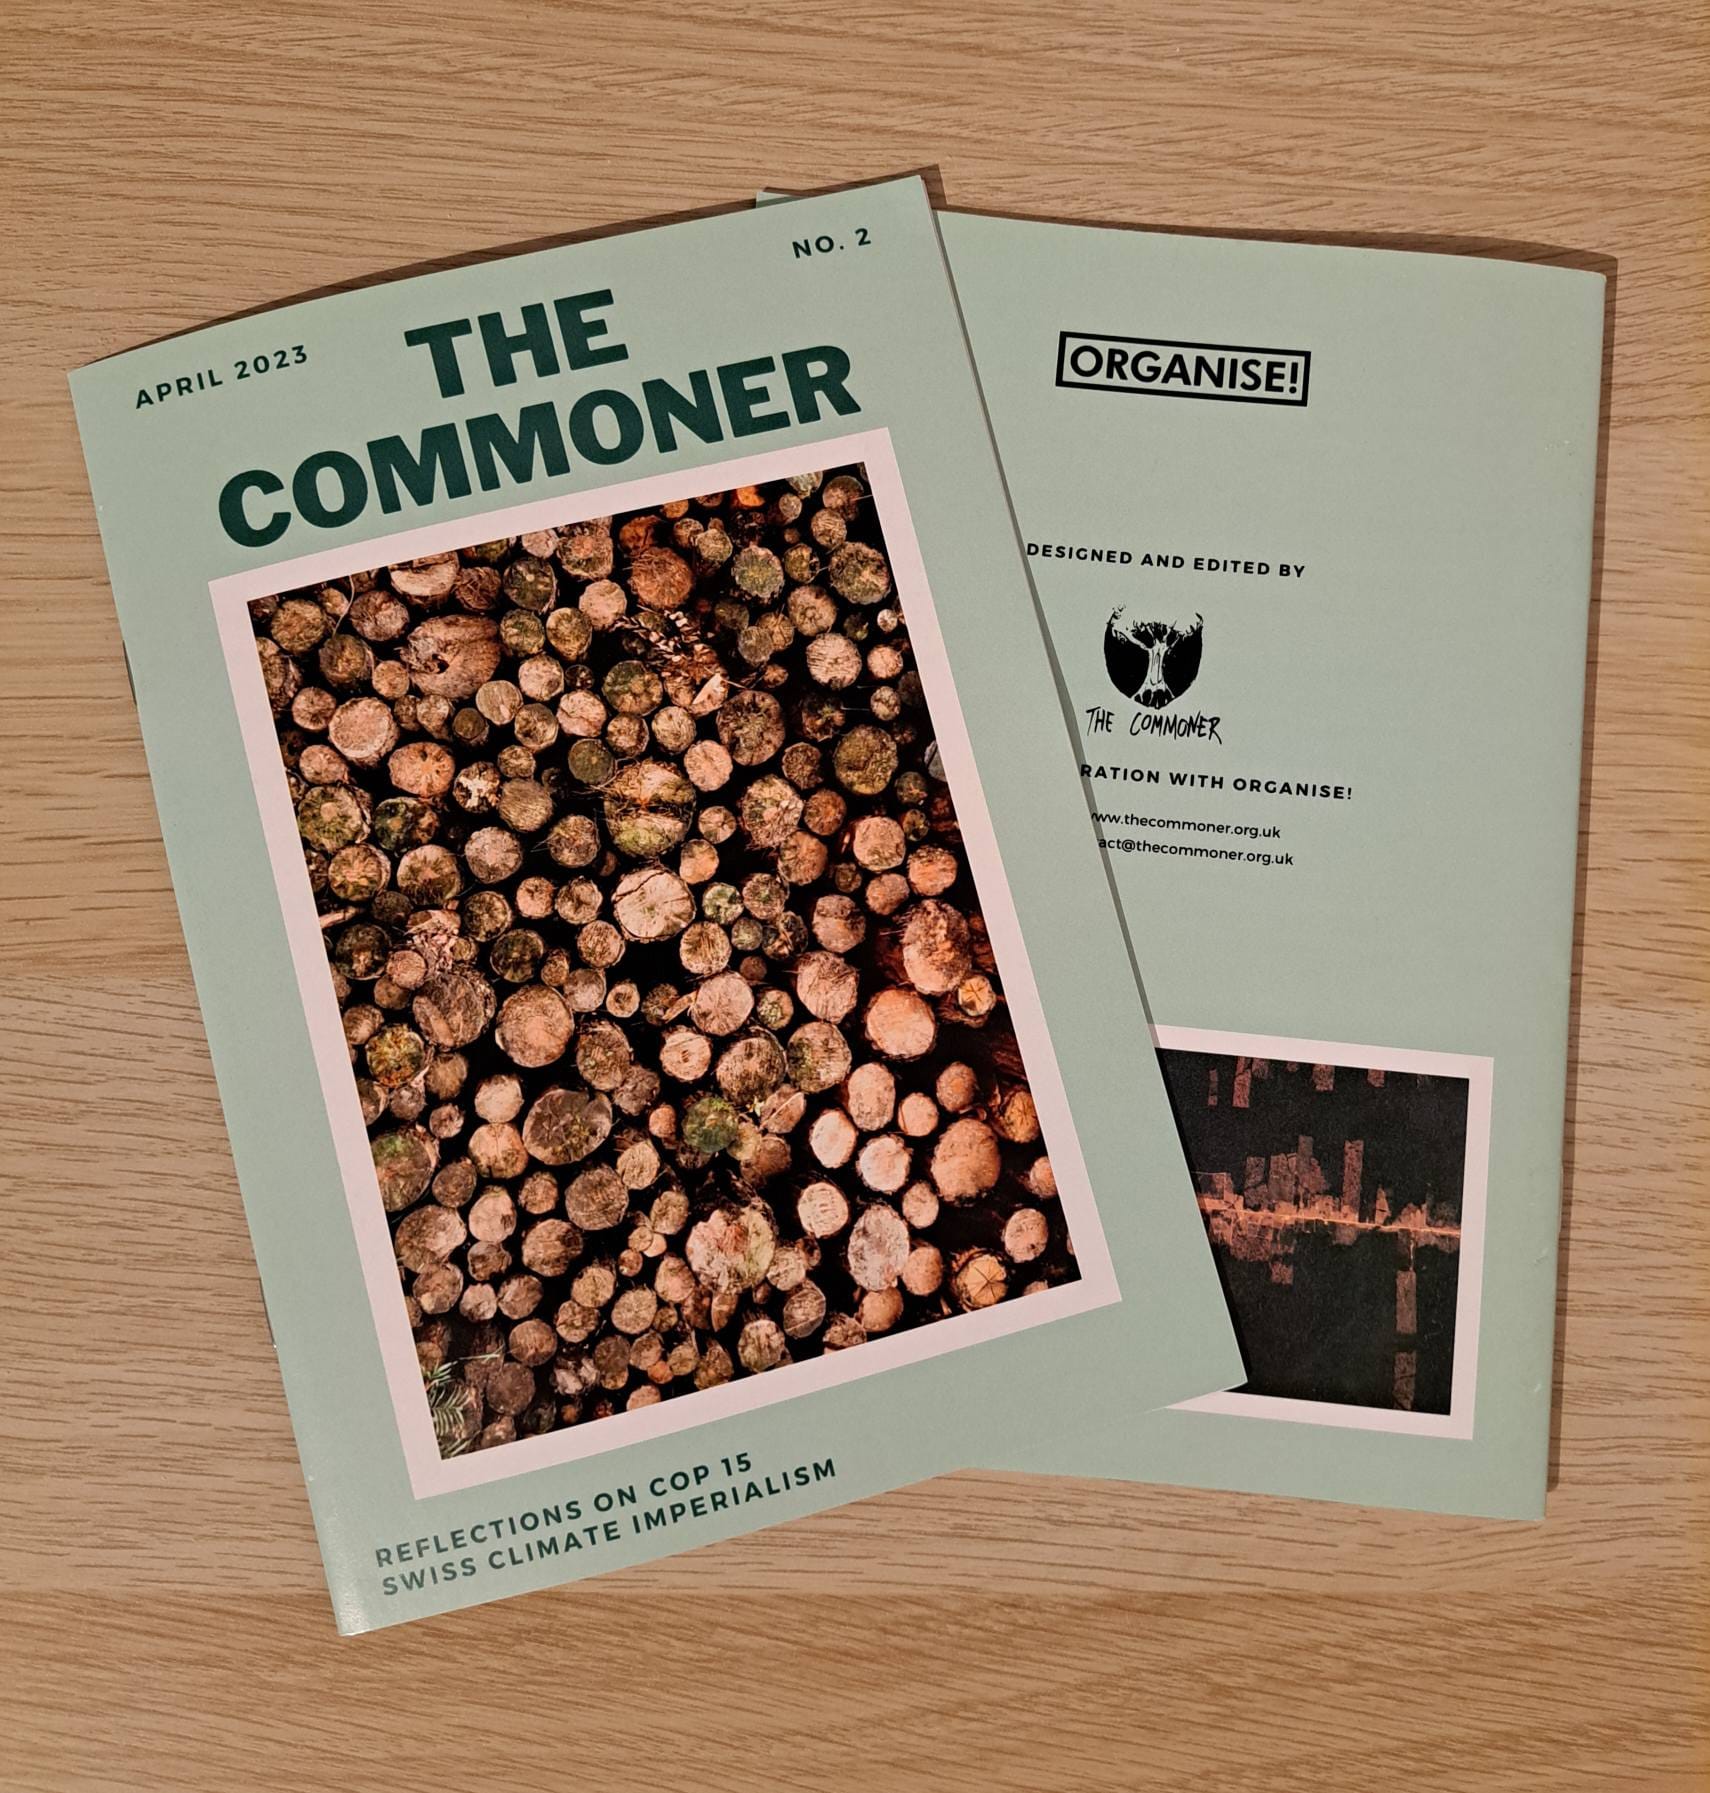 Two printed editions laid out on a wooden surface. The editions are green and contain a large frontcover image of logs. The edition is titled, 'The Commoner No.2.'